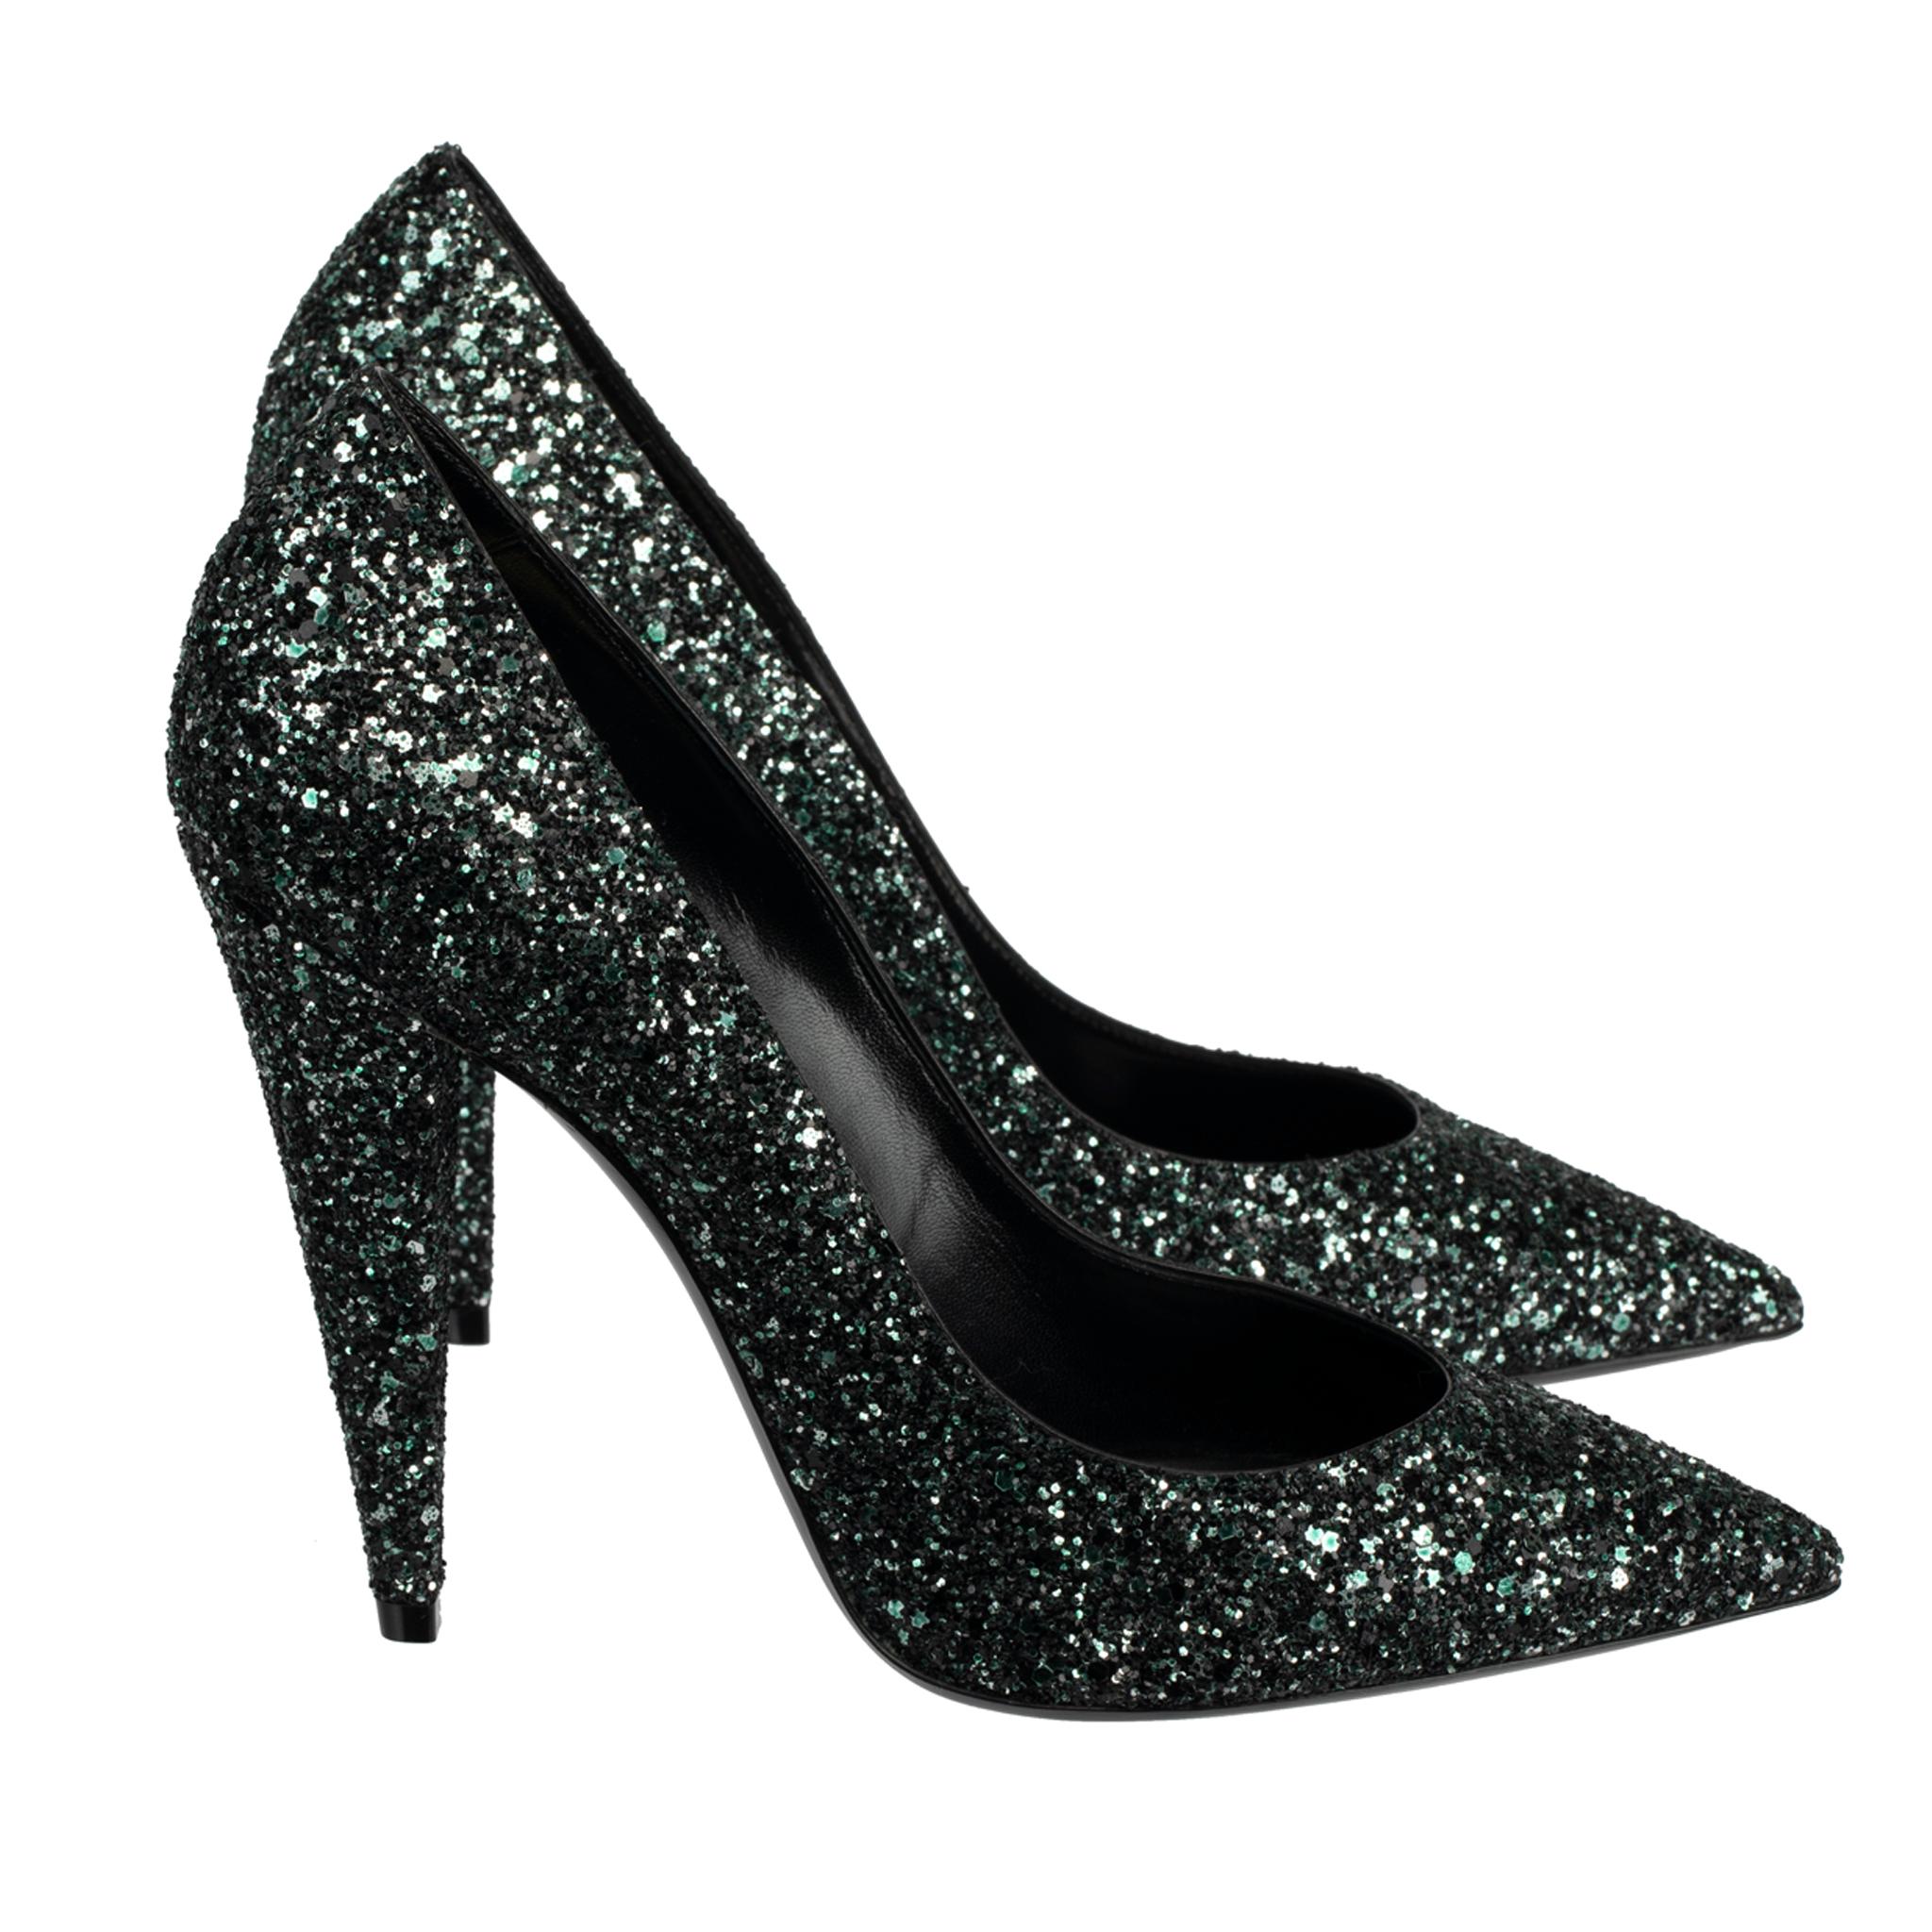 The Yves Saint Laurent Decollete Era Pumps offer a luxurious take on the classic heel. Crafted from black and emerald green glitter, this chic design is perfect for elevating any evening look. With a sleek, sophisticated silhouette, these sparkling